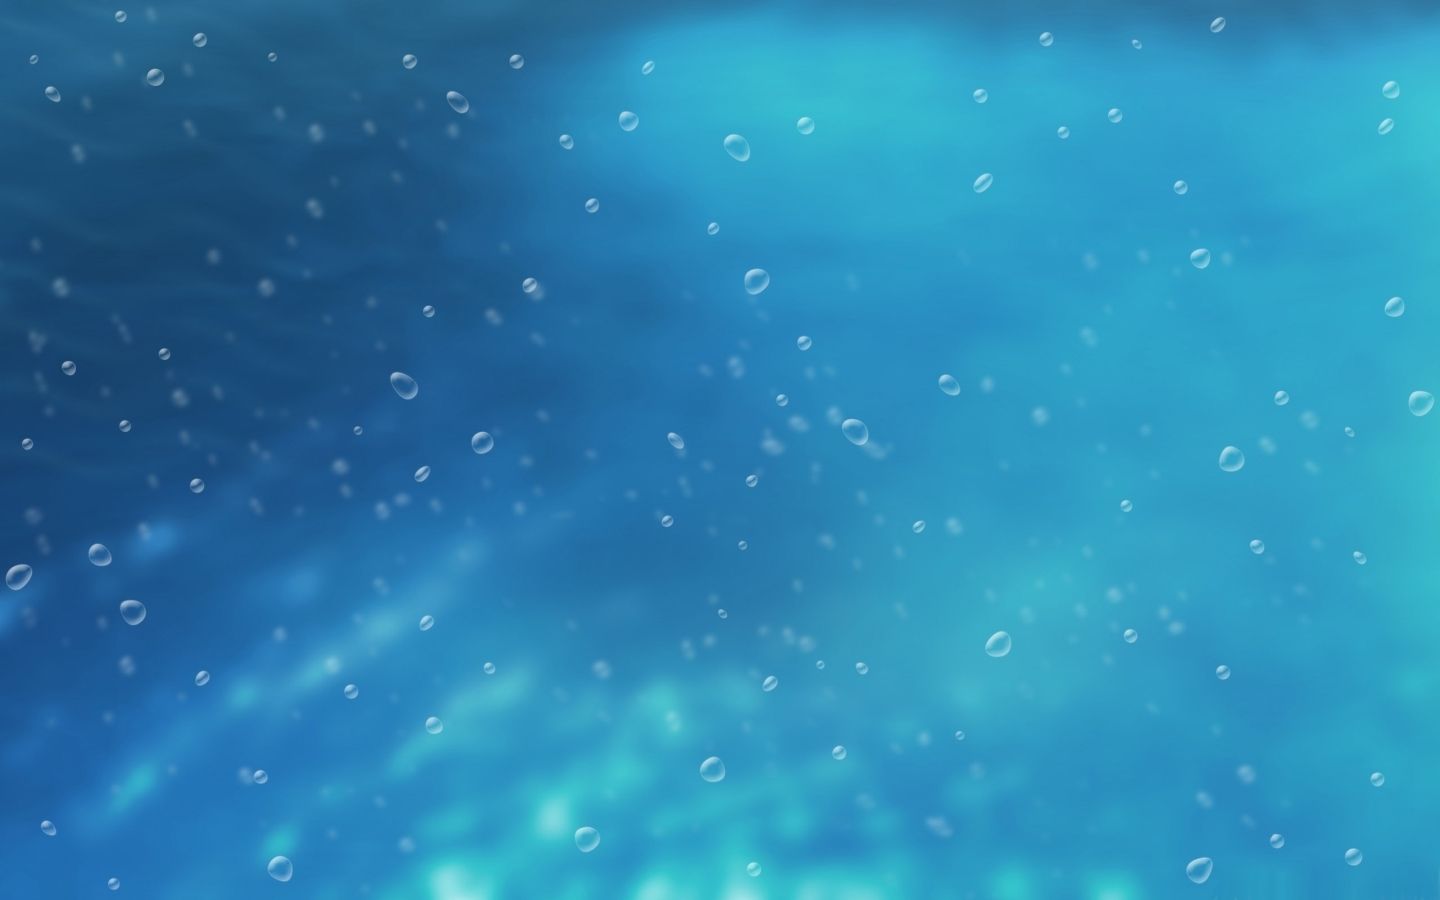 Light Blue Background With Bubbles Mac Wallpaper Download | Free ...